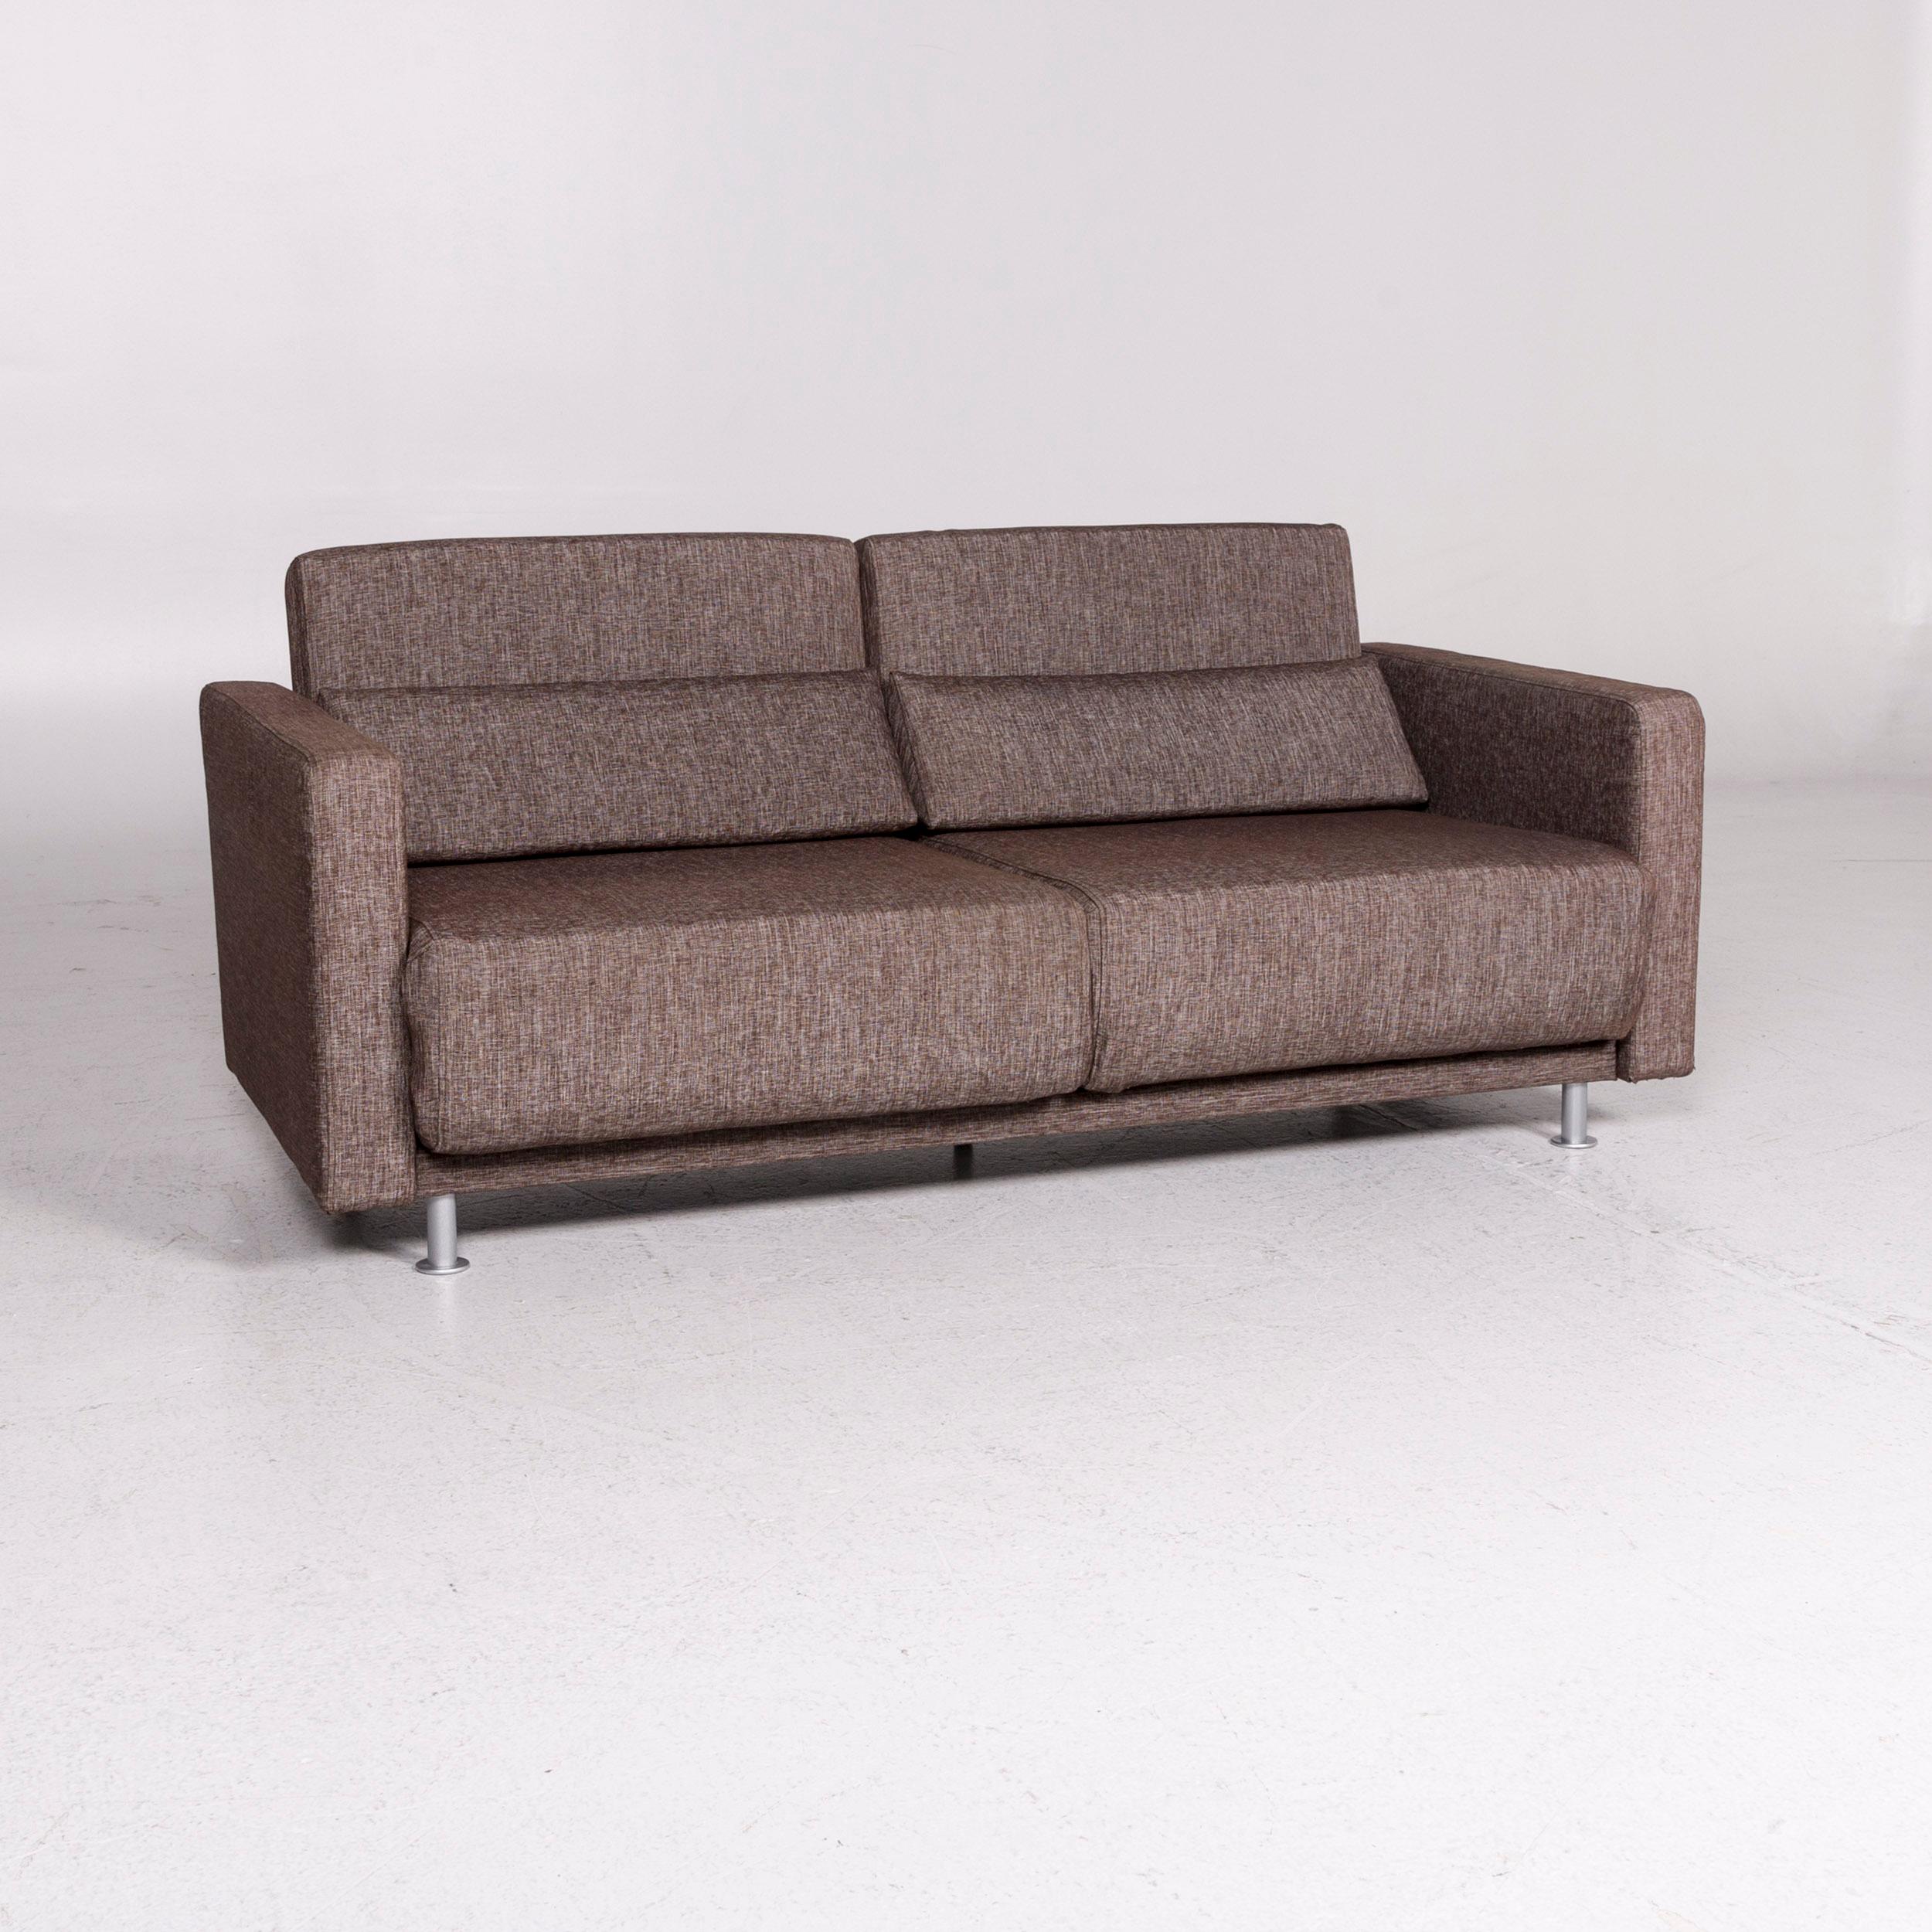 We bring to you a BoConcept Melo fabric sofa bed brown sofa sleep function function couch.

 

 Product measurements in centimeters:
 

Depth 87
Width 175
Height 82
Seat-height 39
Rest-height 50
Seat-depth 52
Seat-width 153
Back-height